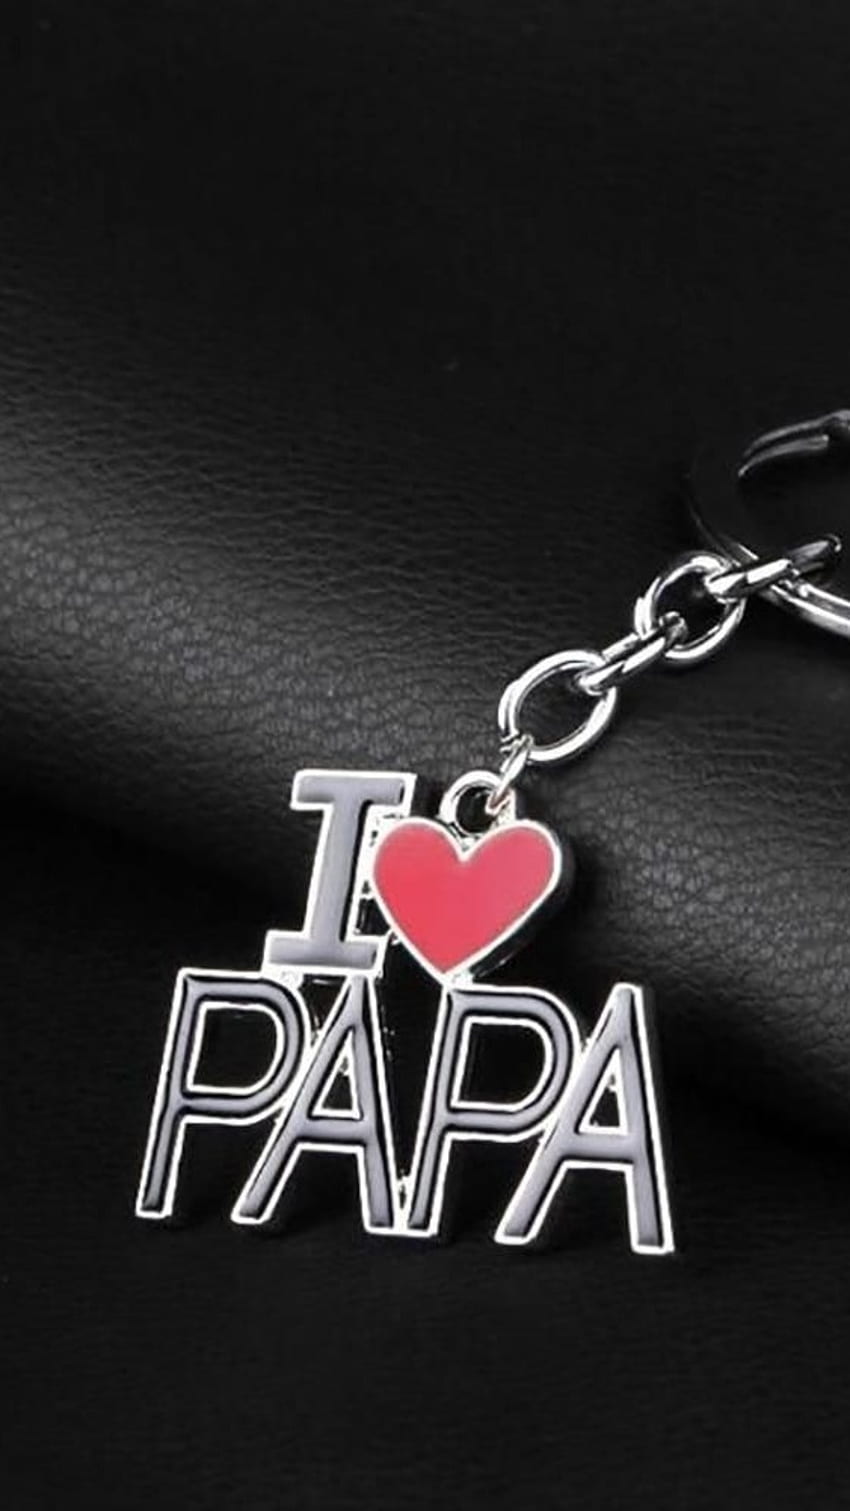 Love You Papa Images Browse 4250 Stock Photos  Vectors Free Download  with Trial  Shutterstock